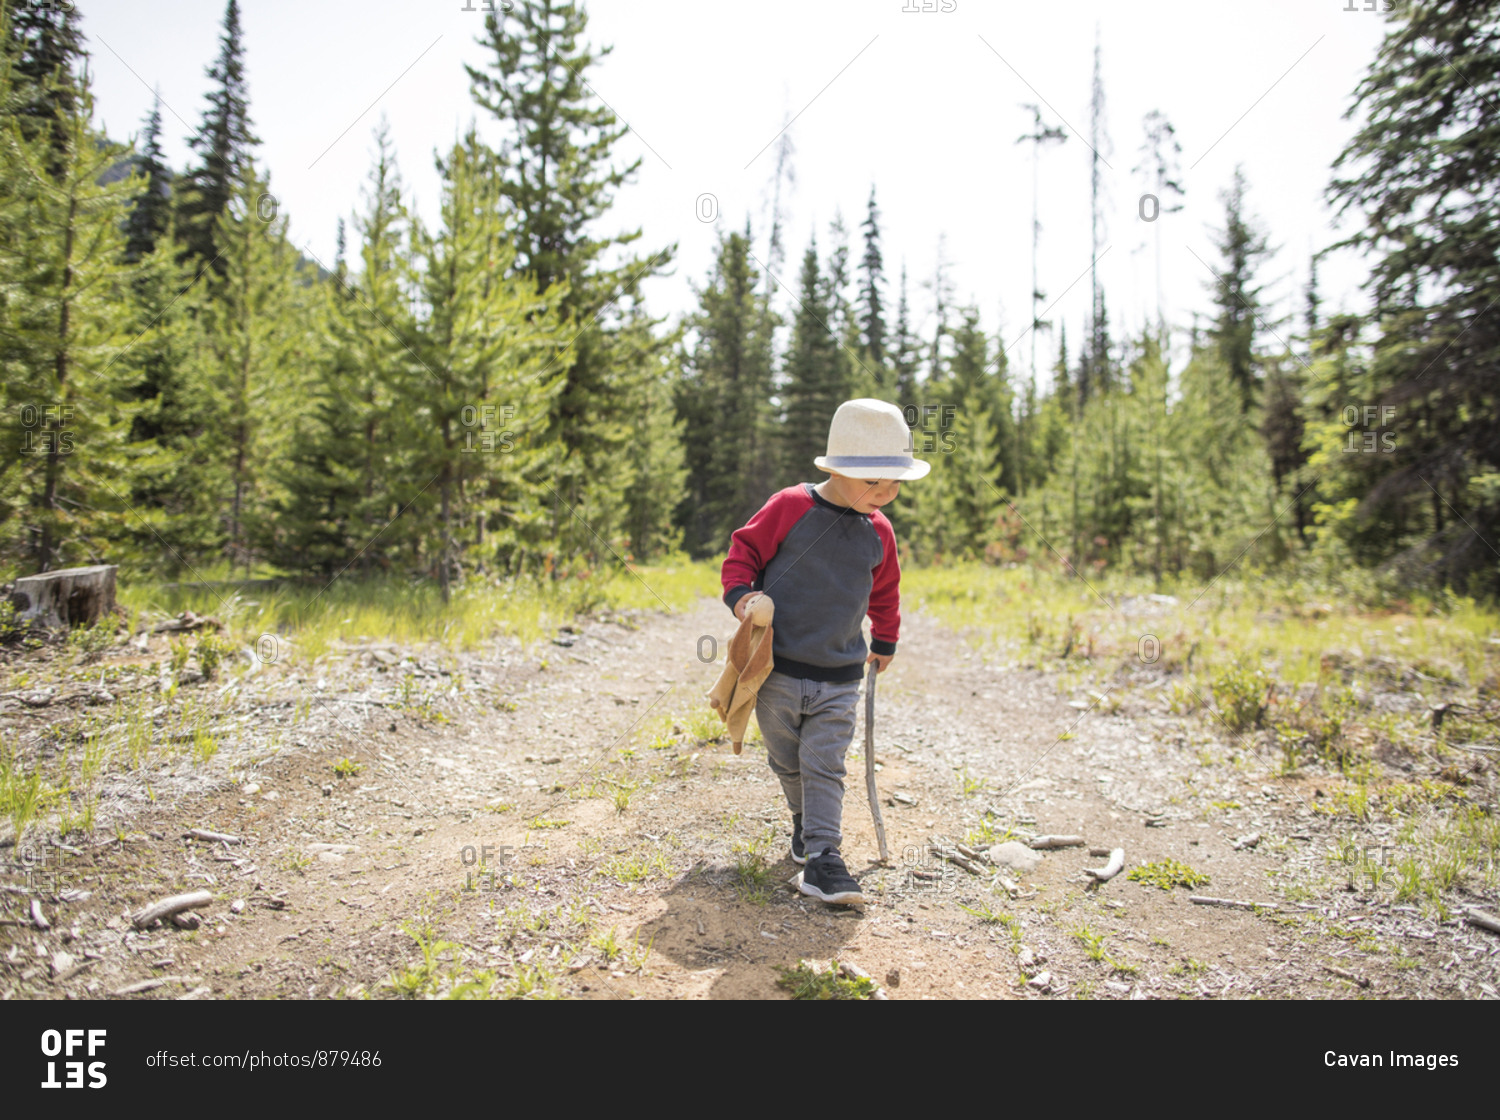 Young care-free boy walking on dirt path with walking stick and bunny